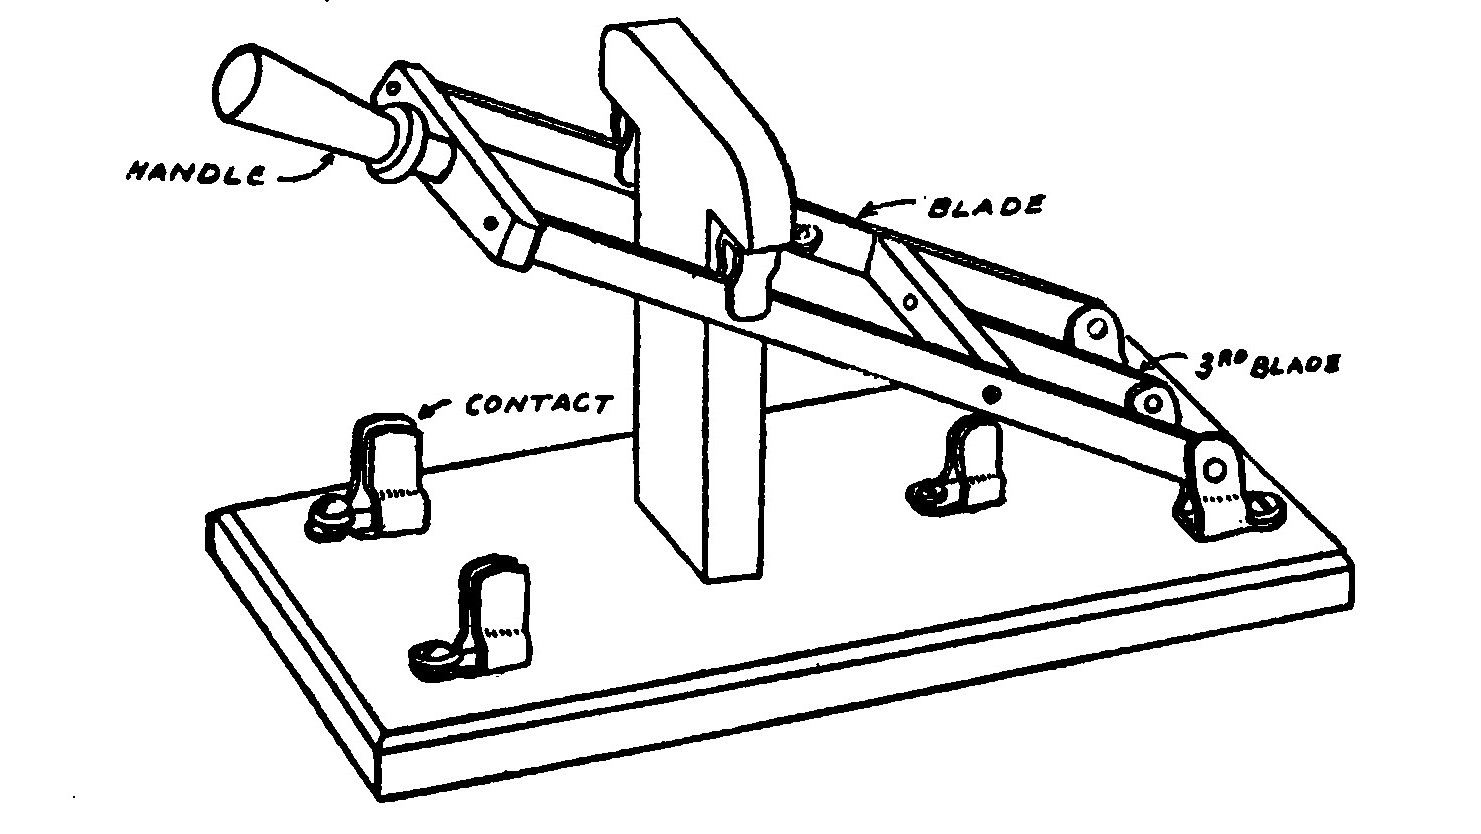 FIG. 43. Aerial Switch.